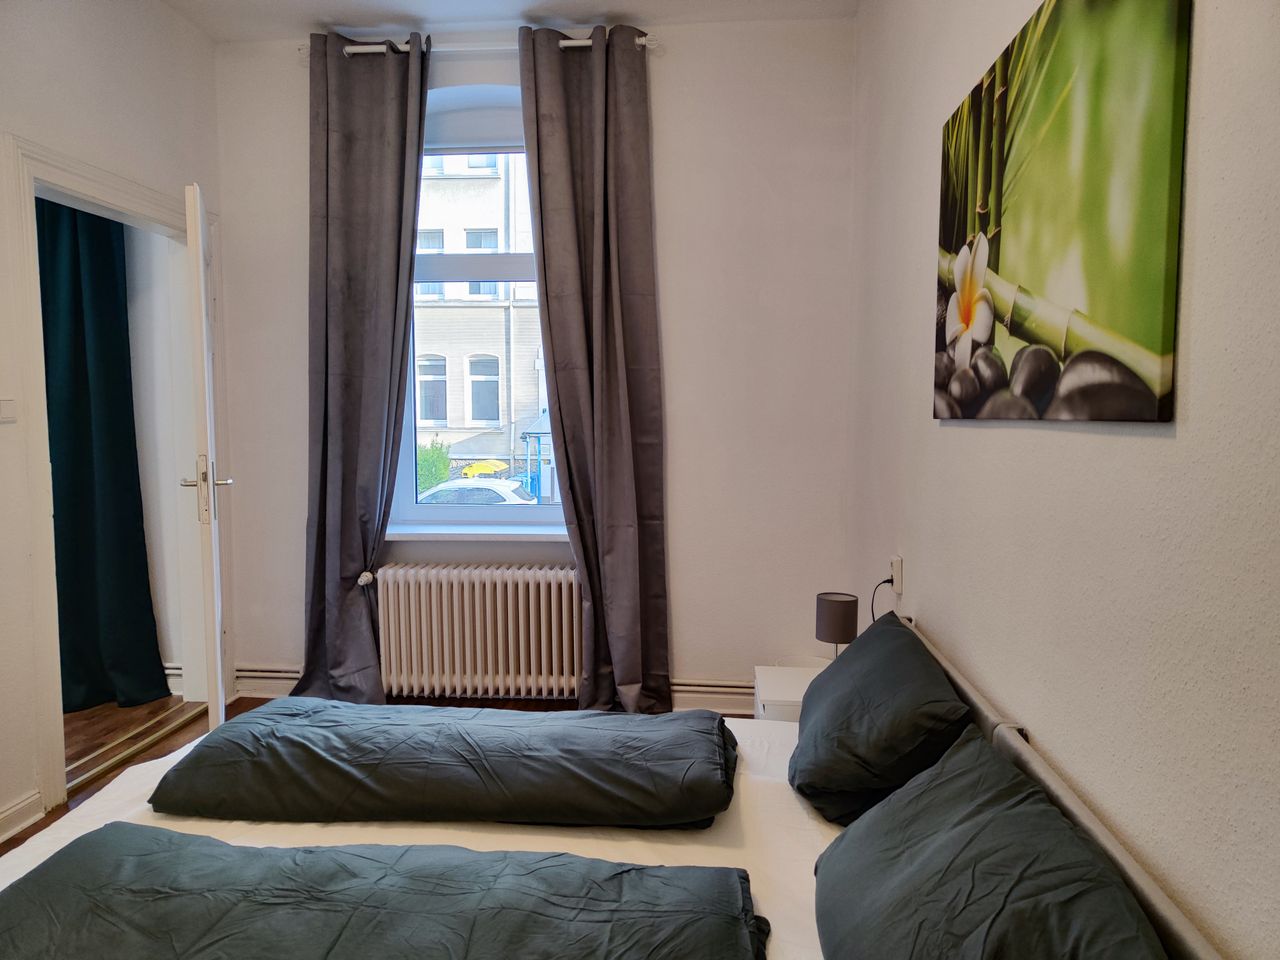 Spacious accommodation - close to the city centre